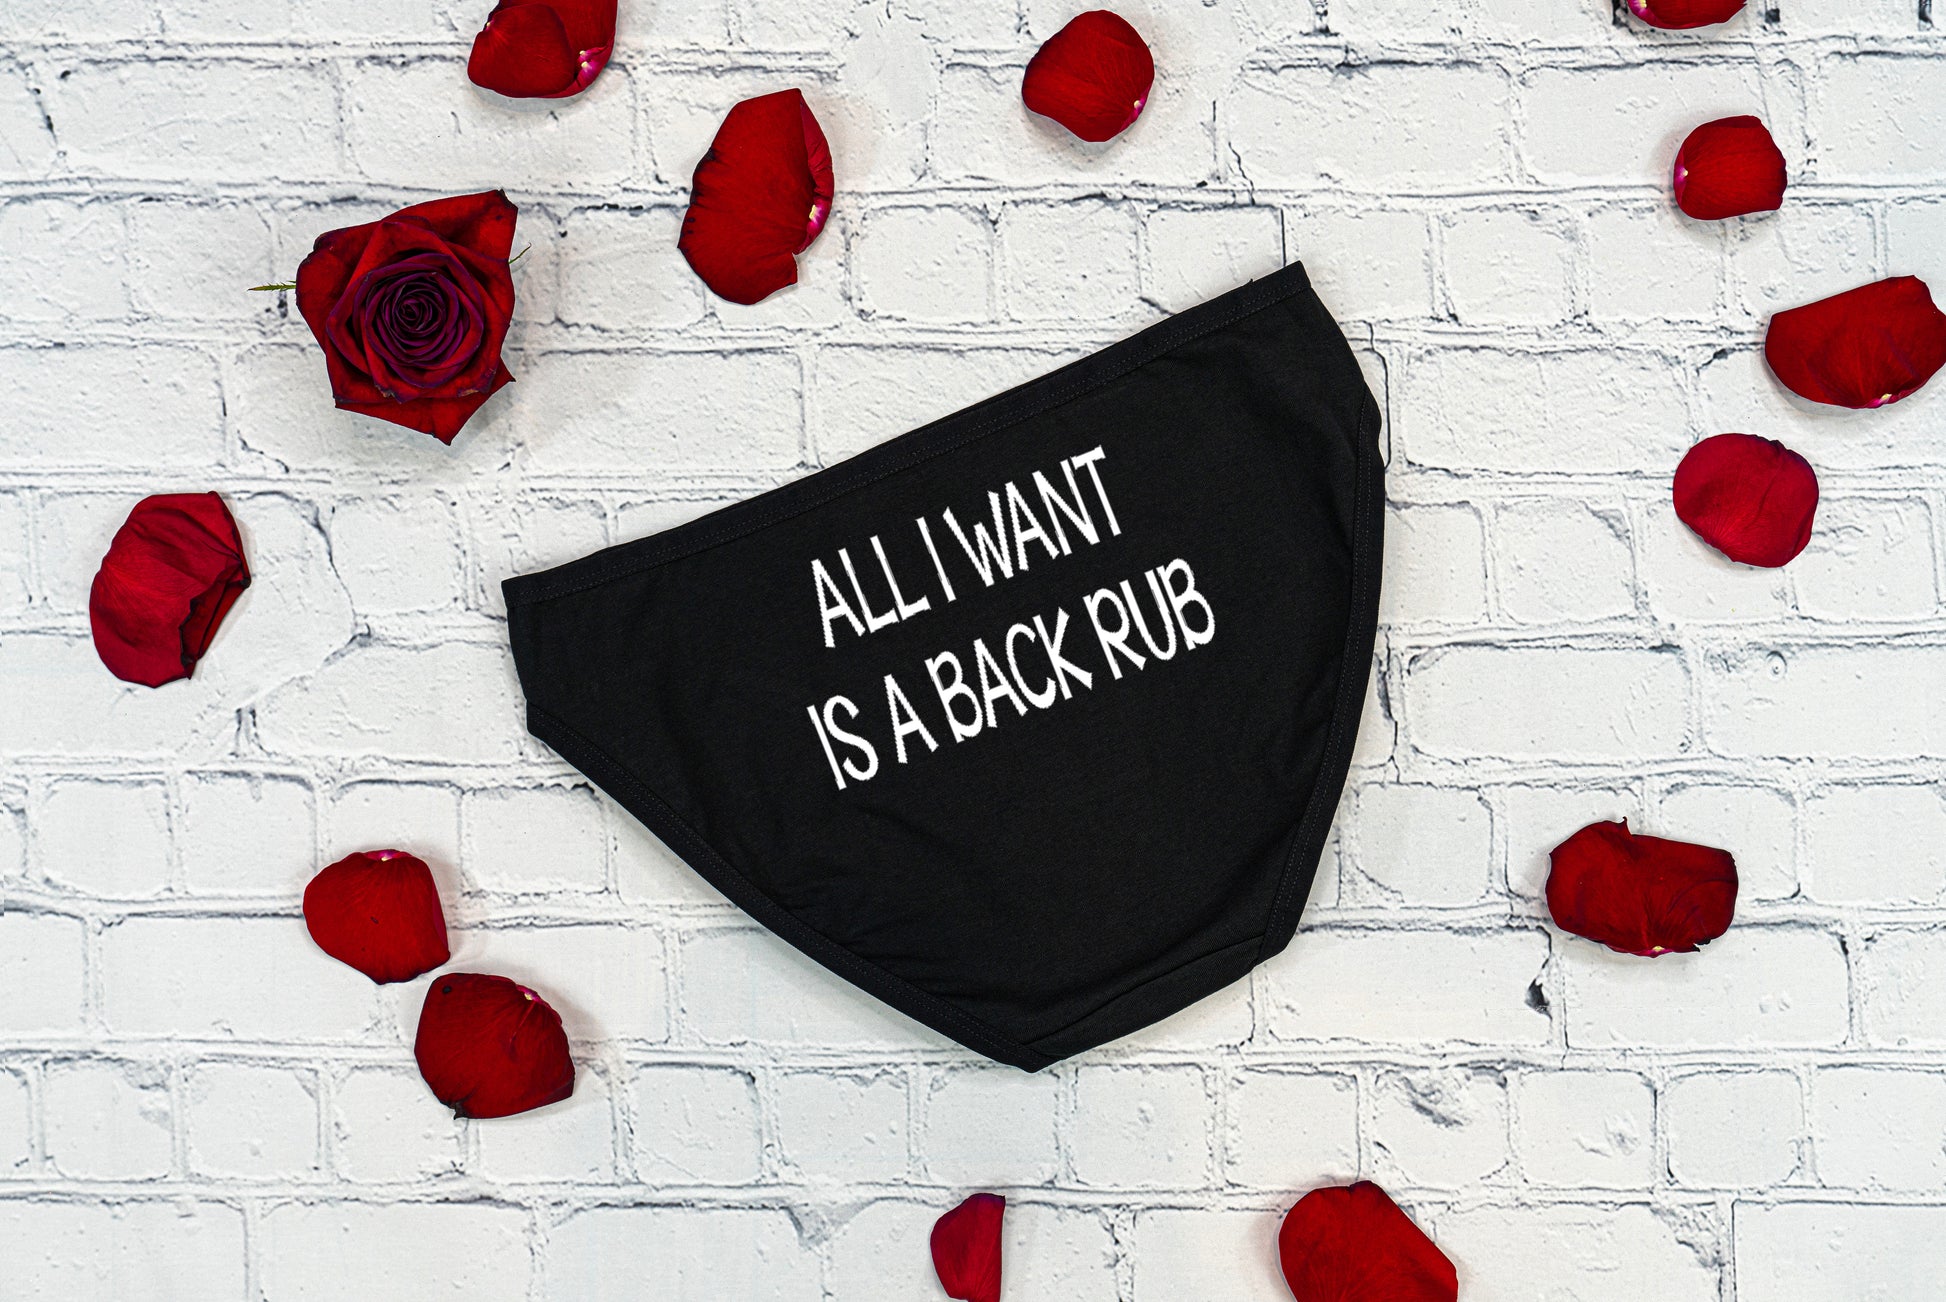 All I want is a back rub underwear panties Valentine – It's